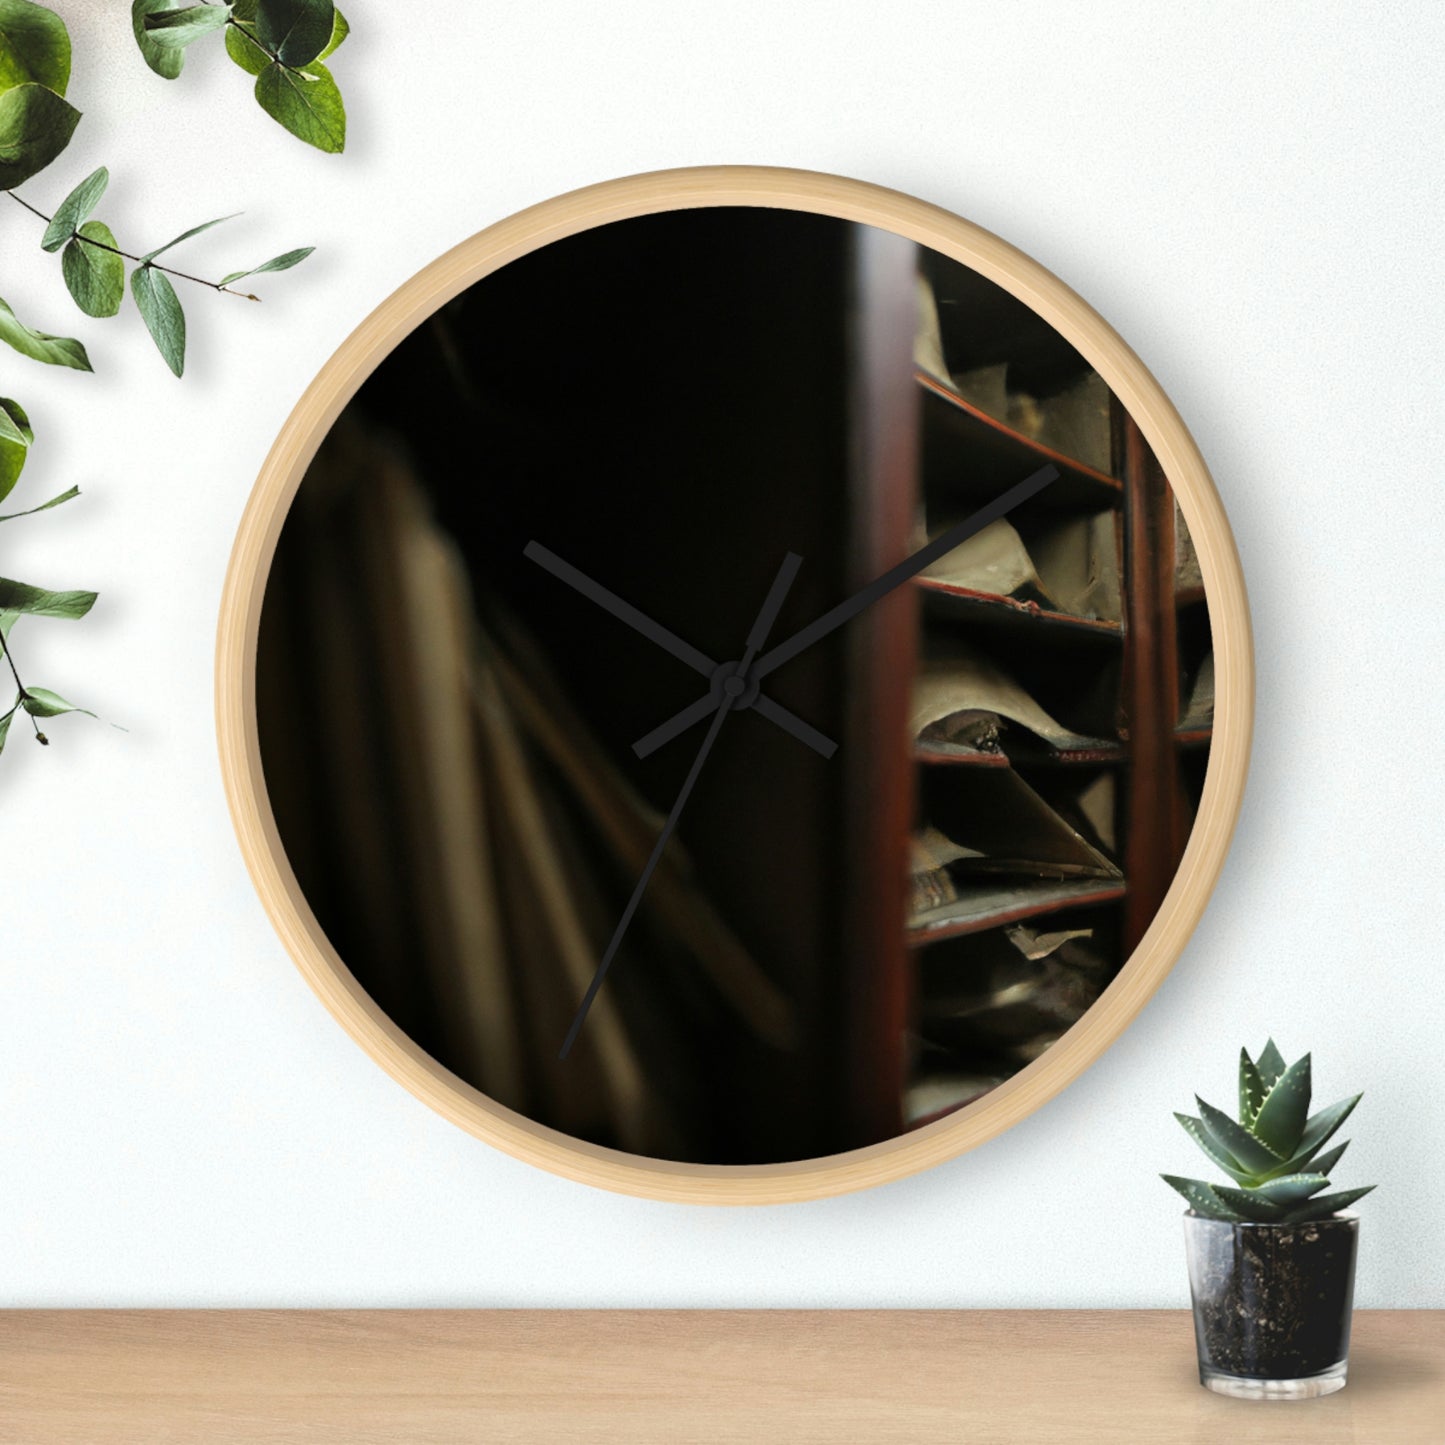 "Mystery of the Antiquarian Library" - The Alien Wall Clock